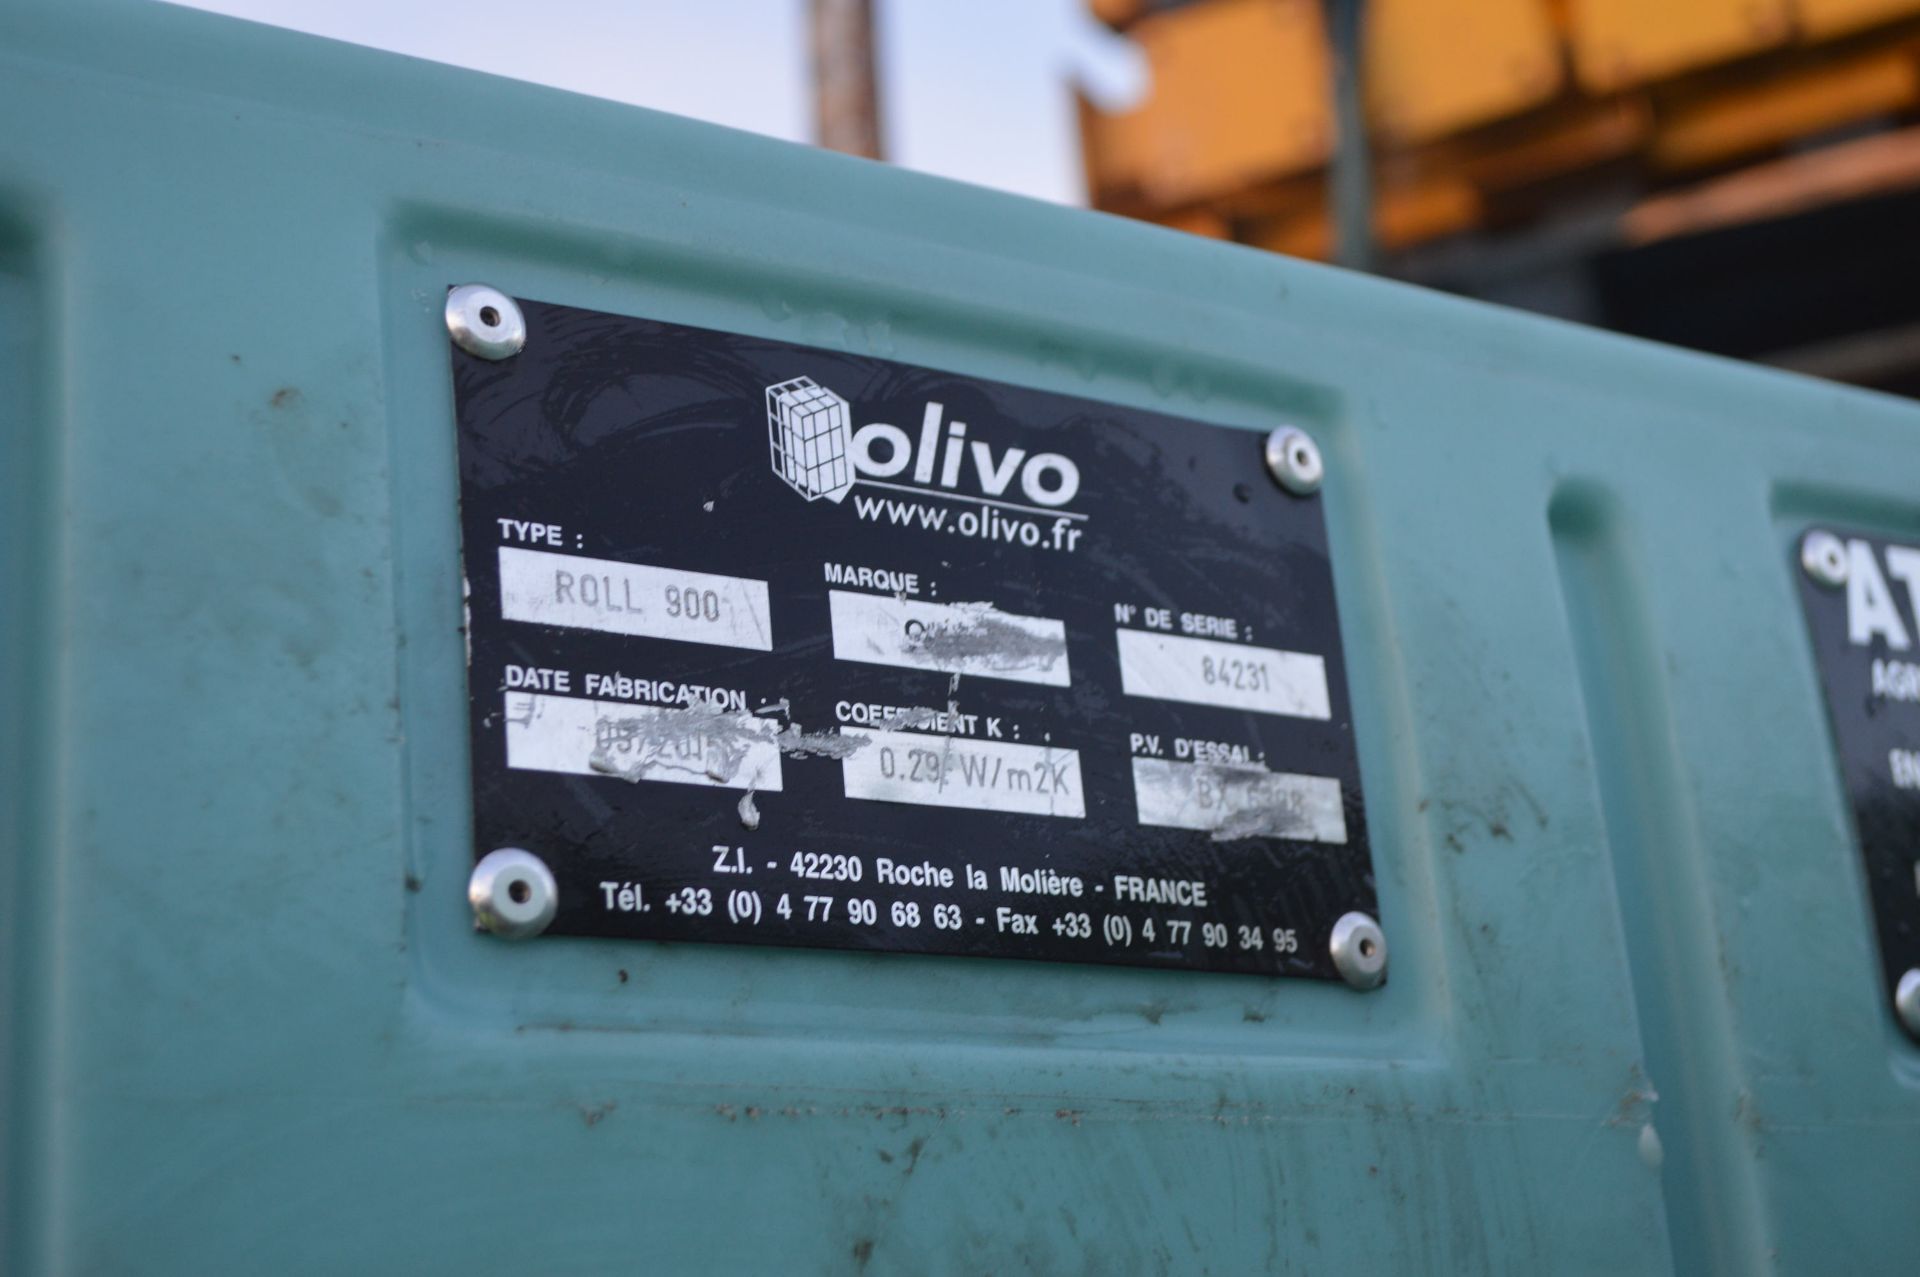 OLIVO THERMOTAINER (INSULATED ROLL CONTAINER) TYPE ROLL 900L - Image 5 of 6